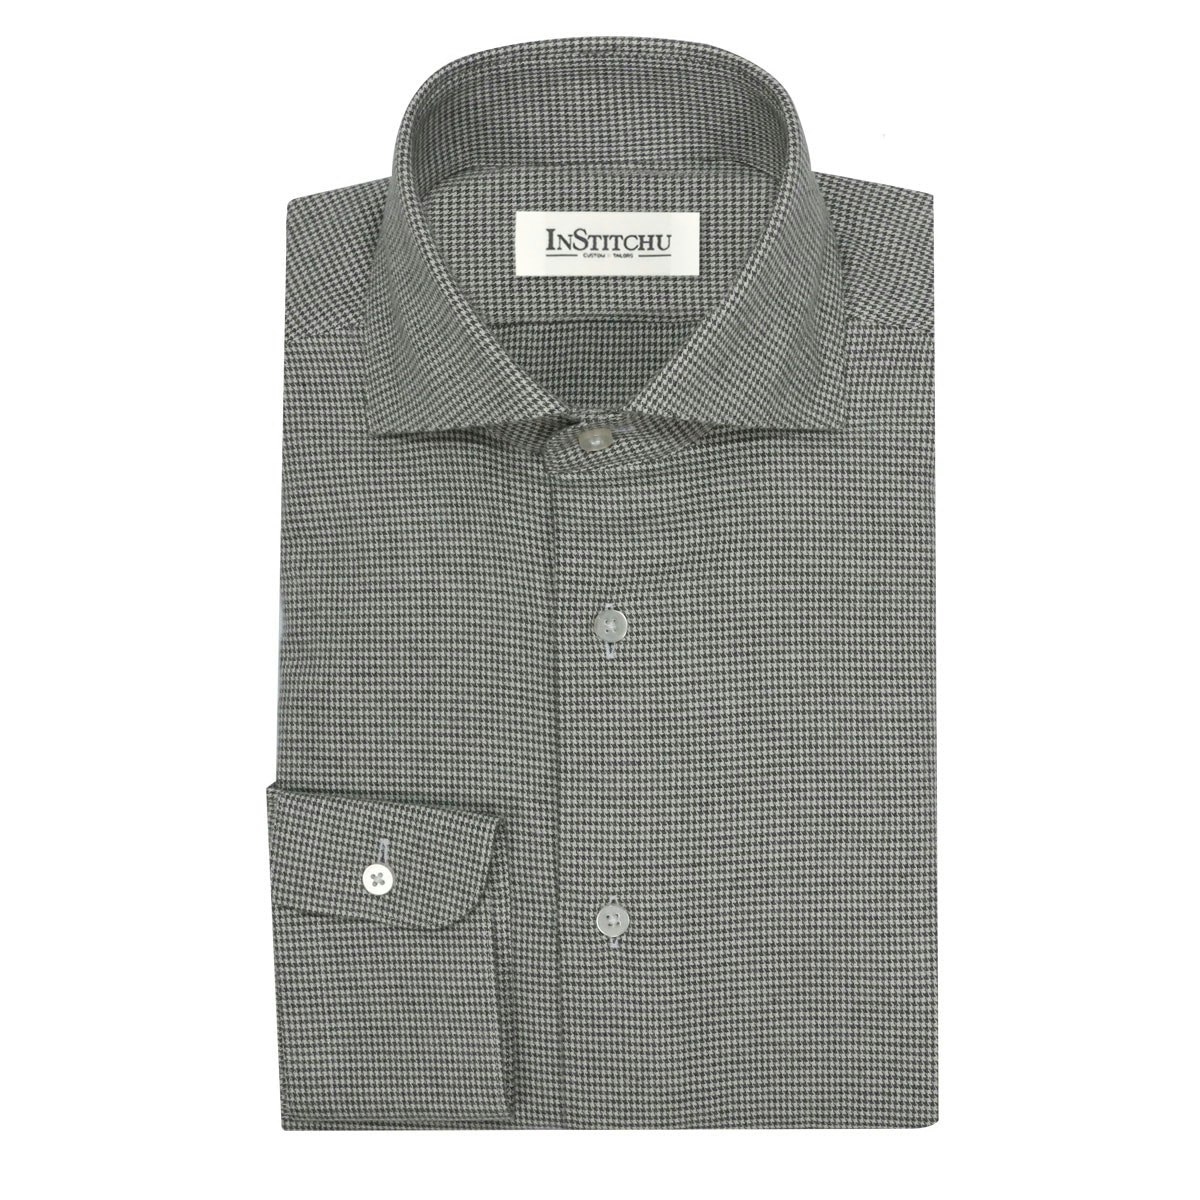 InStitchu Collection The Lutong Olive Shirt